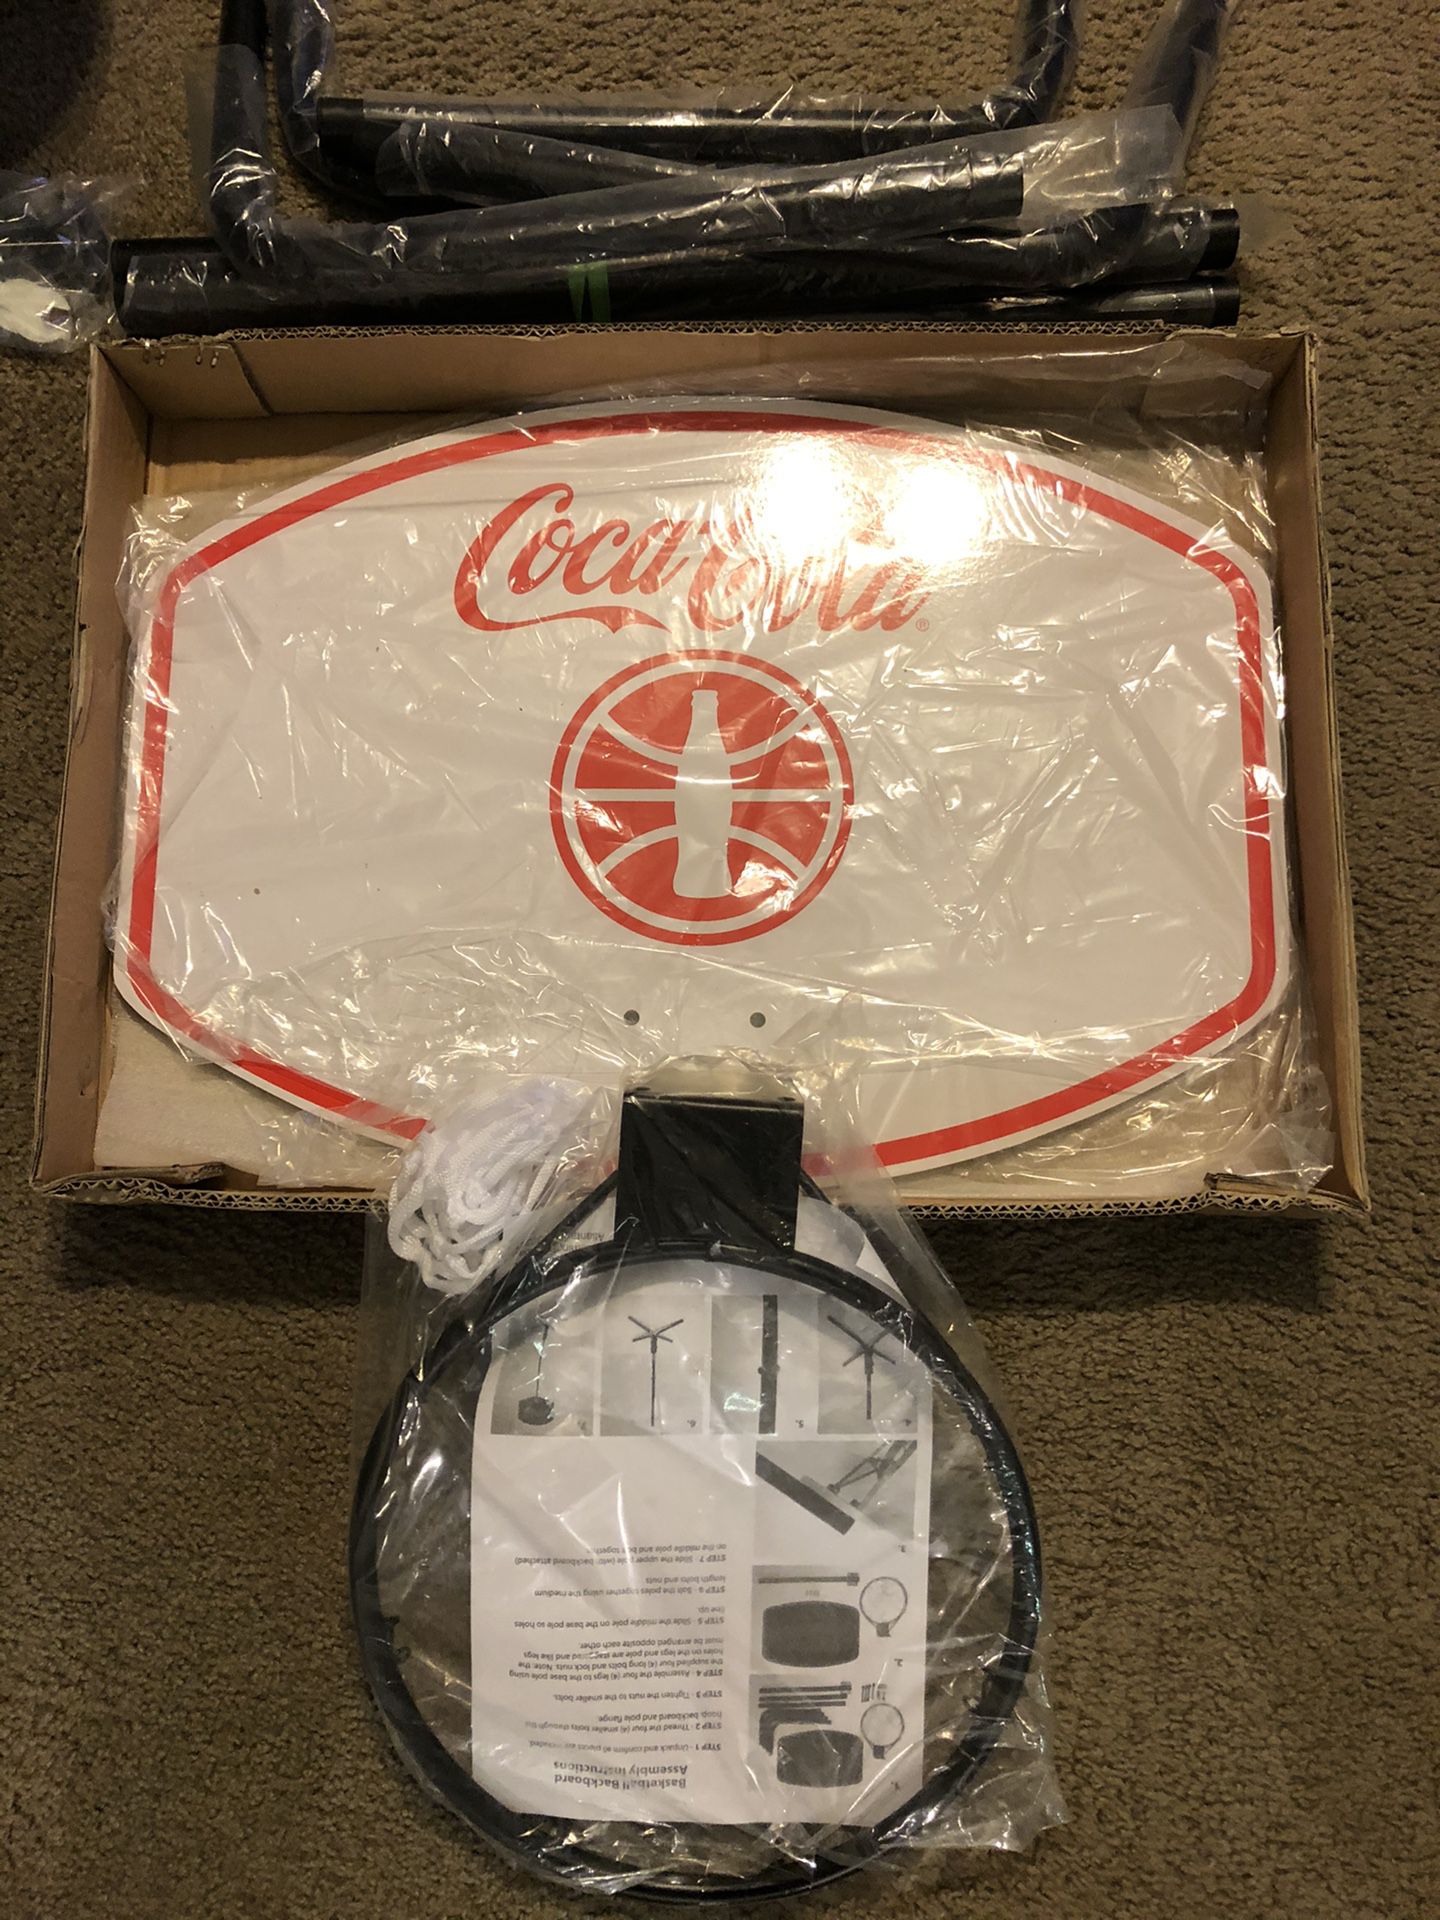 6ft Brand new basketball hoop in box Coca Cola back board